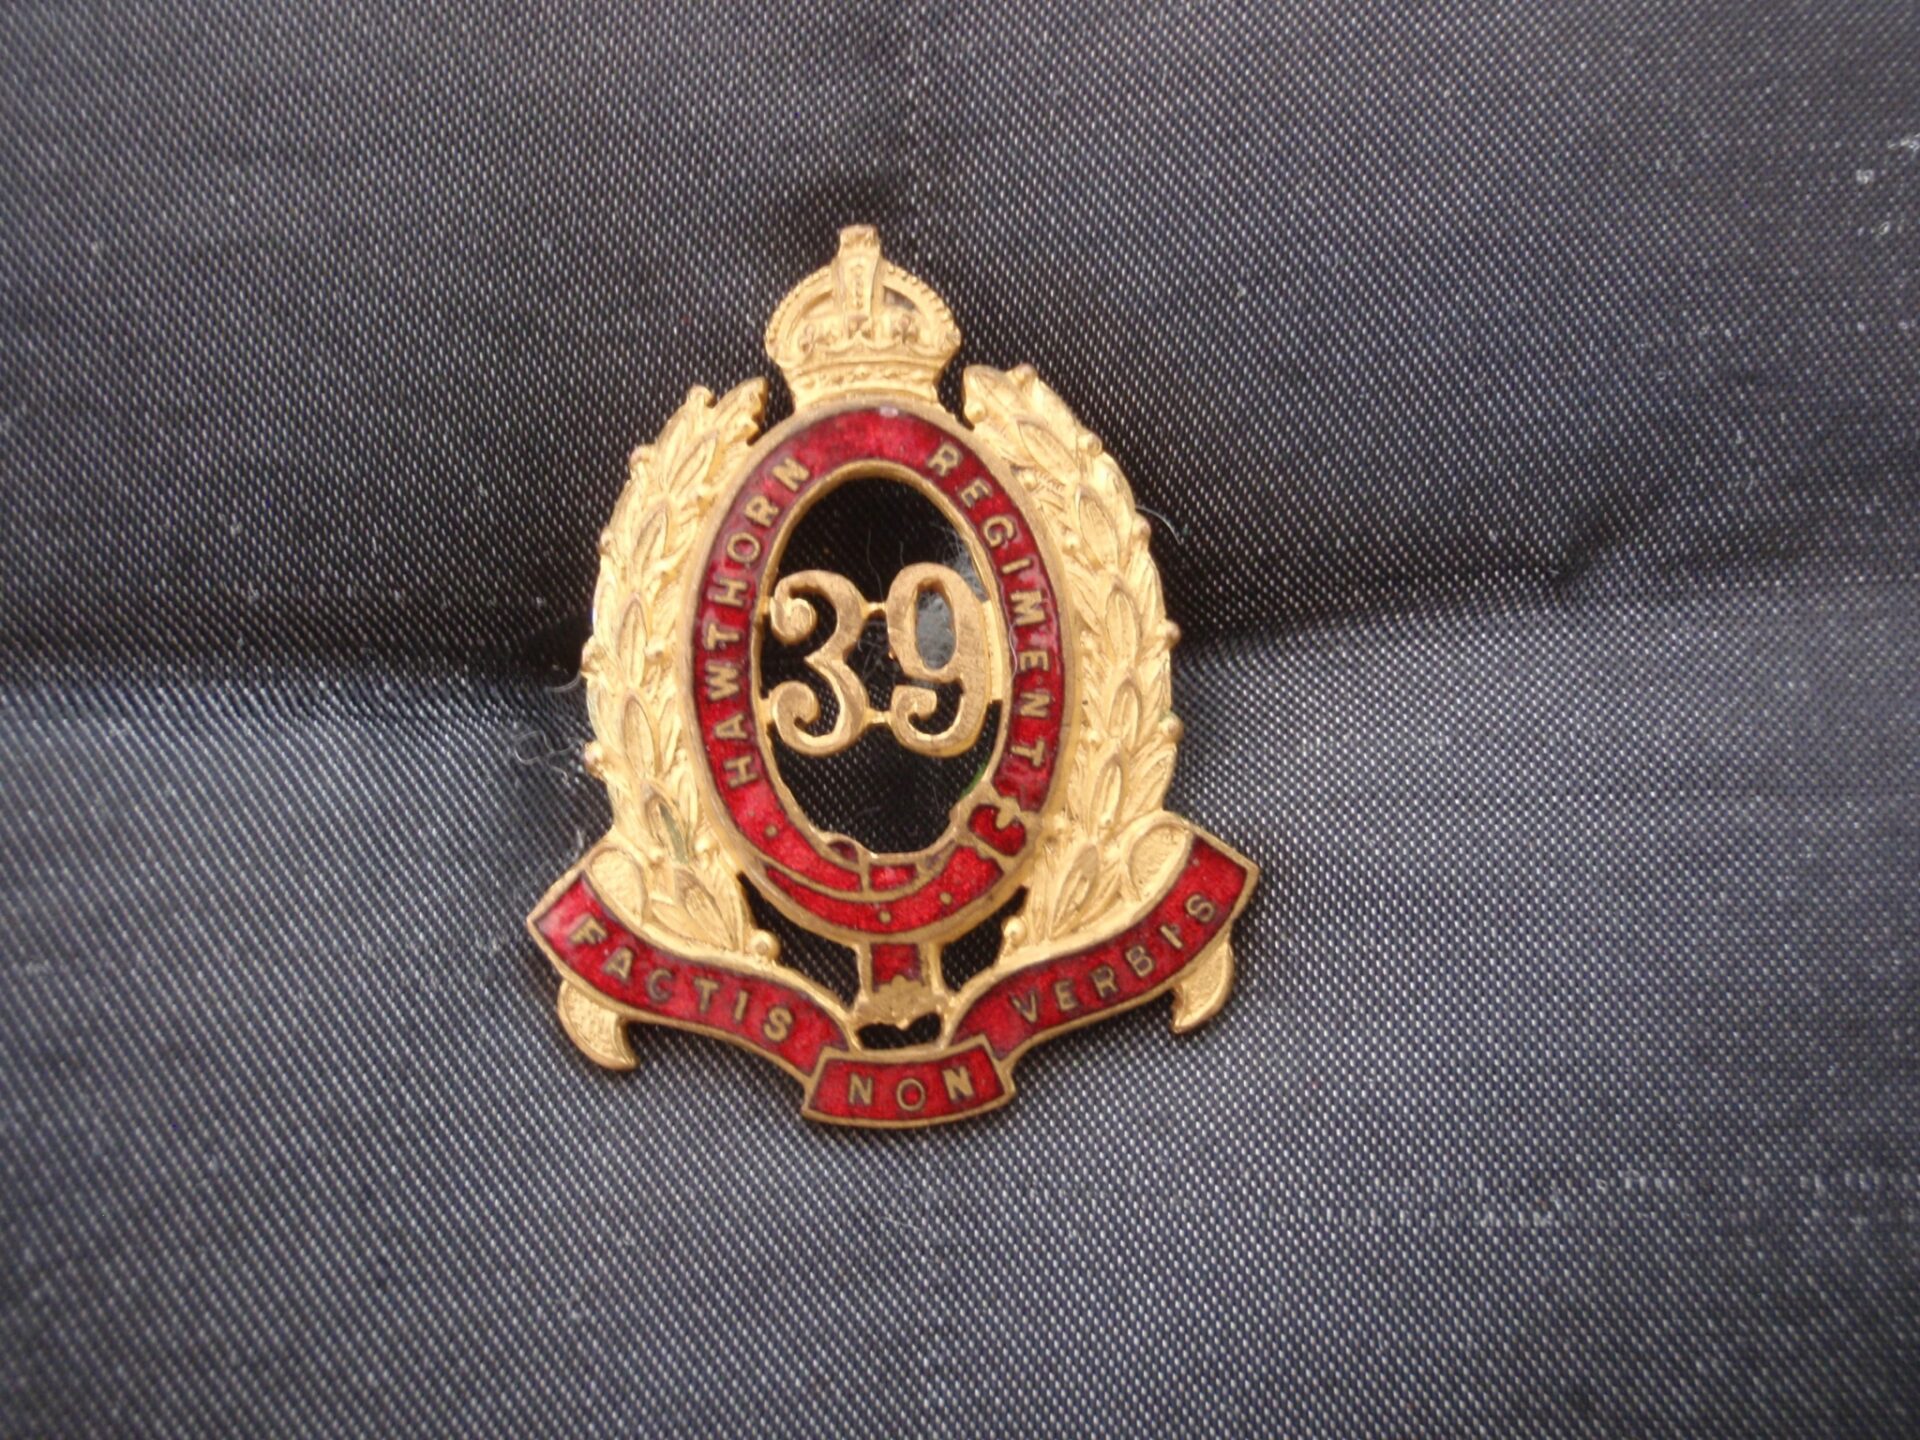 Hat Badge. Note that it shows as the Hawthorn Regiment, later to become the Hawthorn-Kew Regiment.